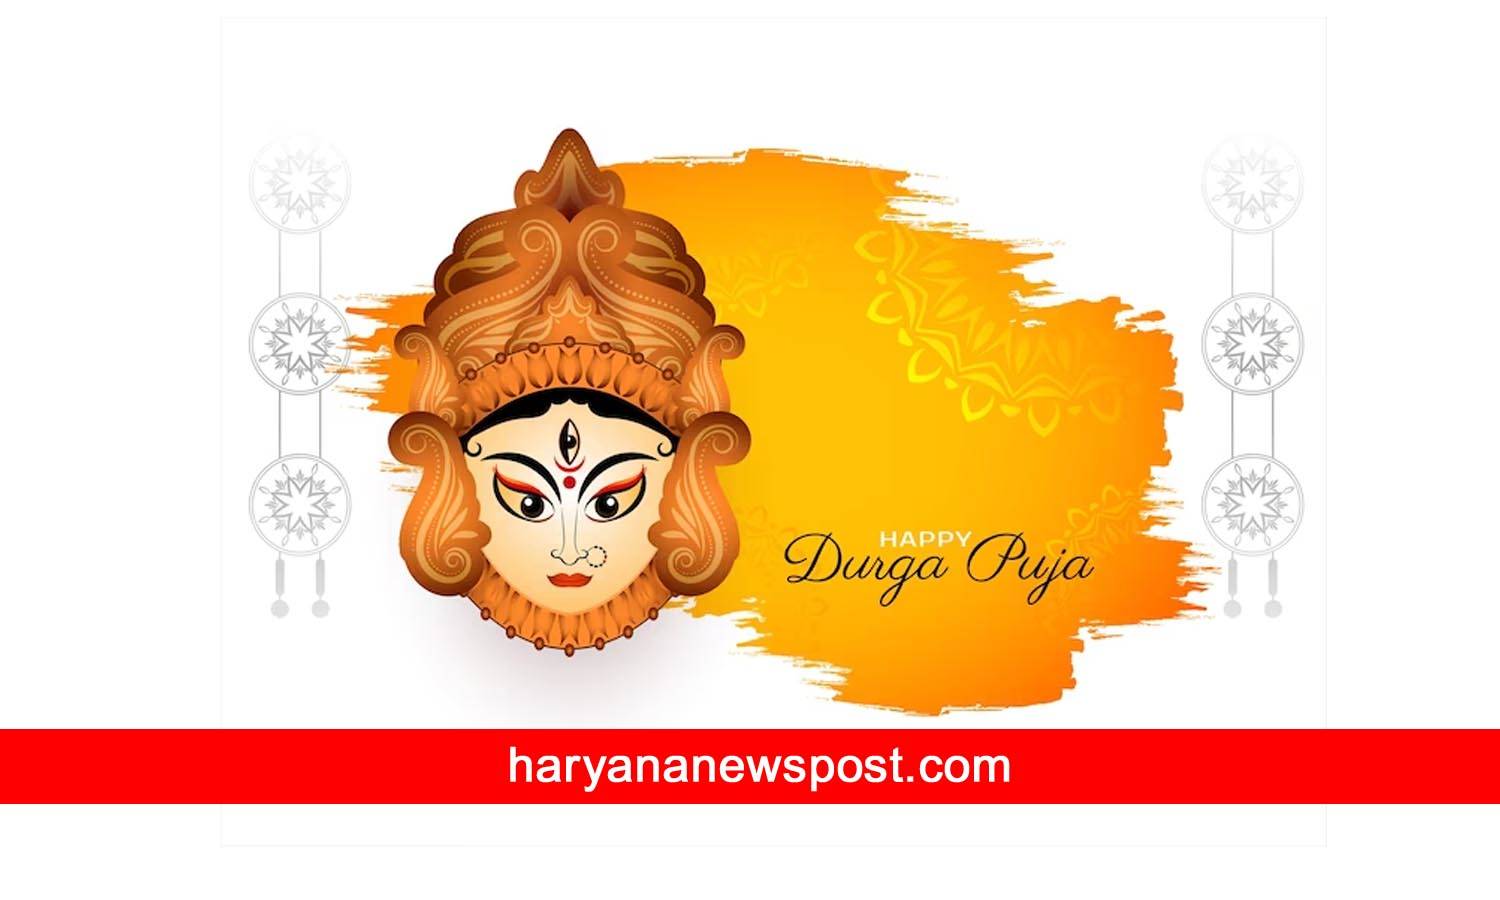 Durga Puja Wishes quotes in Hindi and English